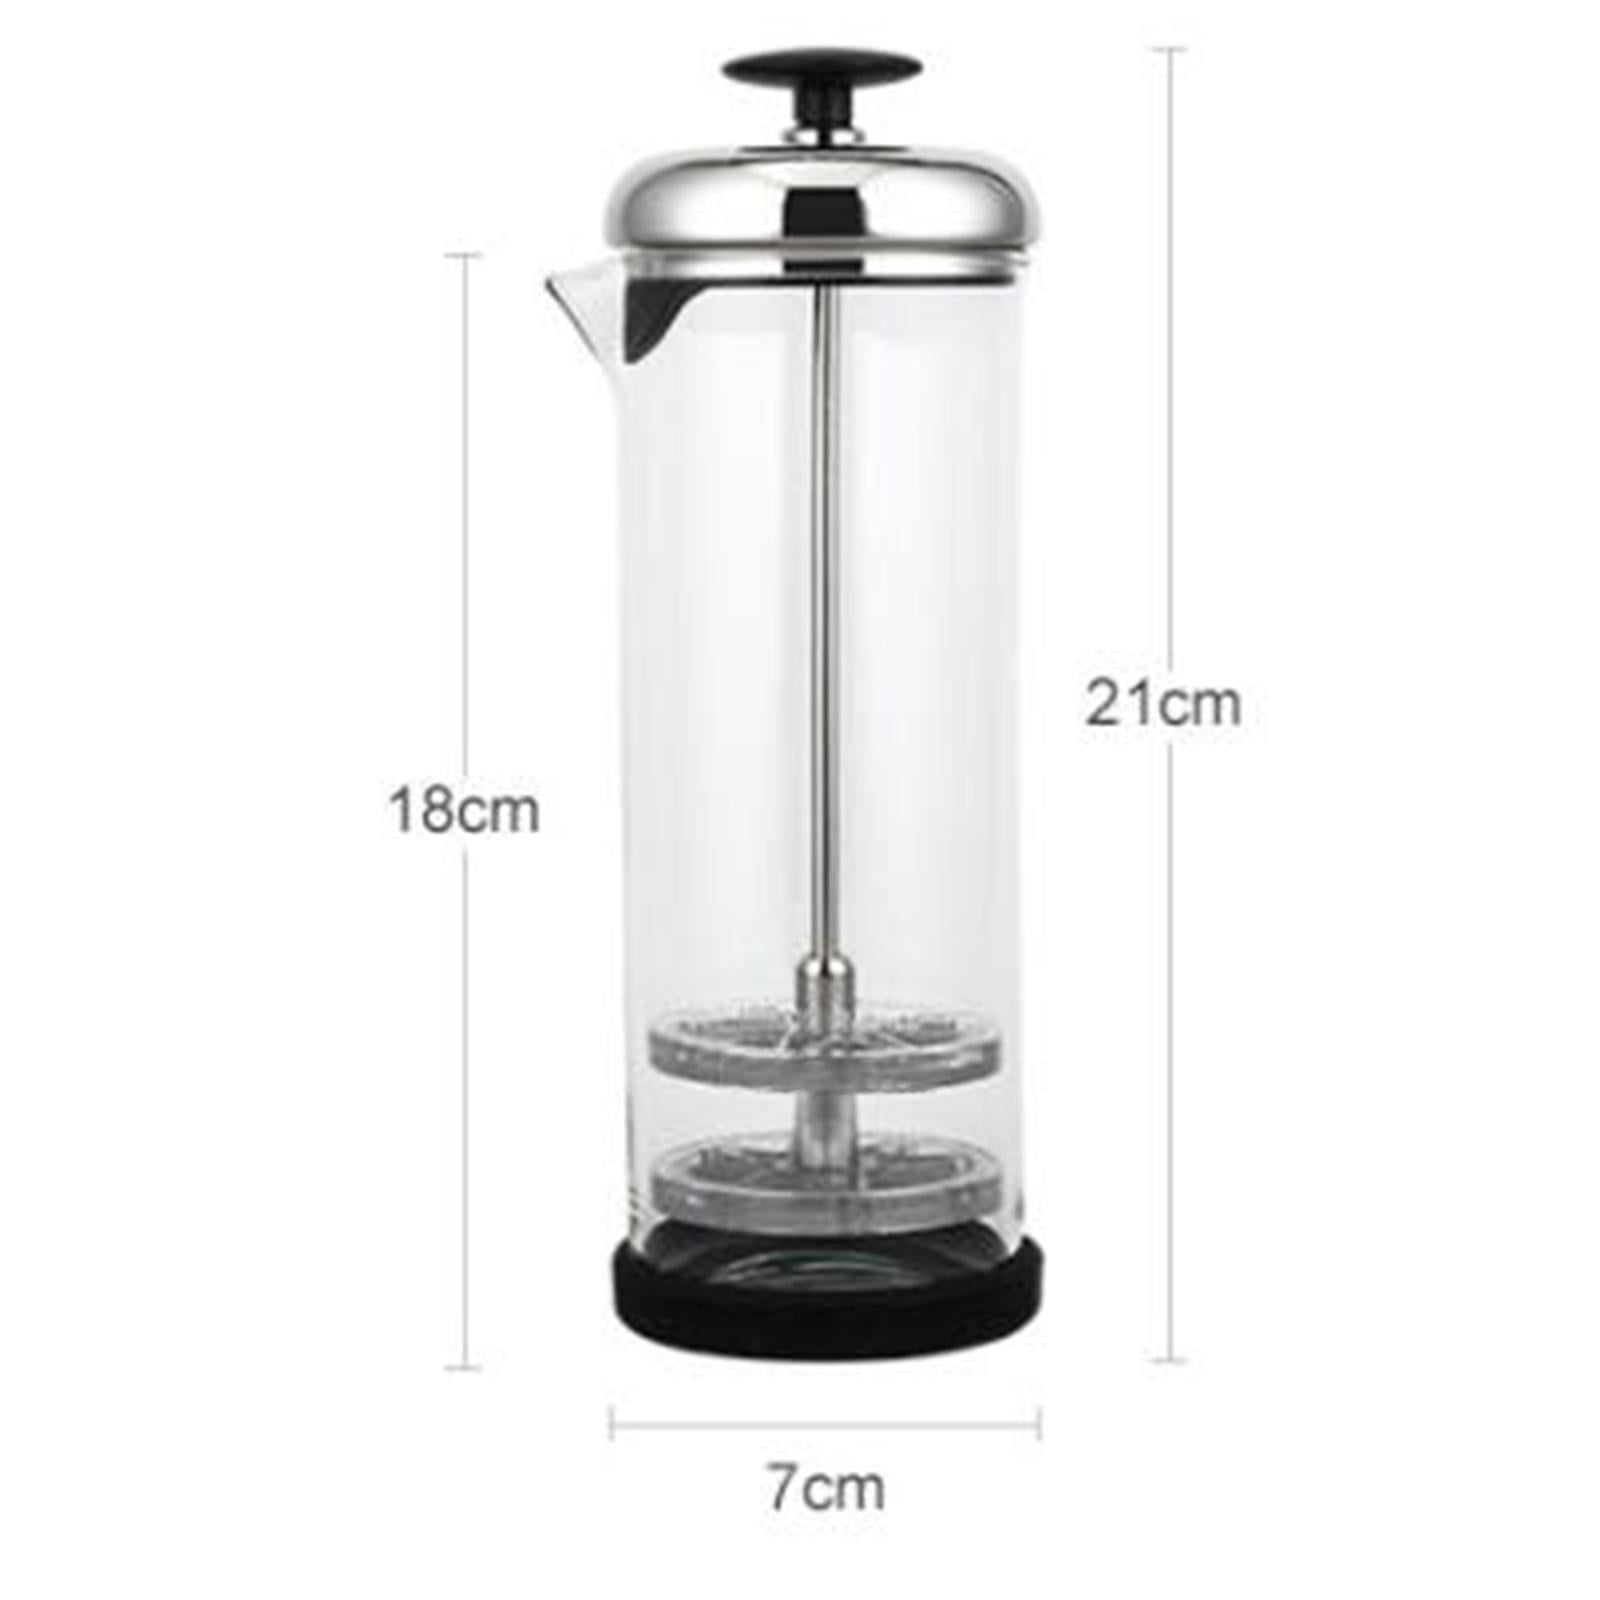  Manual Milk Creamer Hand Pump Frother Cappuccino Latte Coffee  Foam Pitcher with Handle, Lid, Double Layer Filter Screen, Stainless Steel,  17-Ounce Capacity (500ml): Home & Kitchen